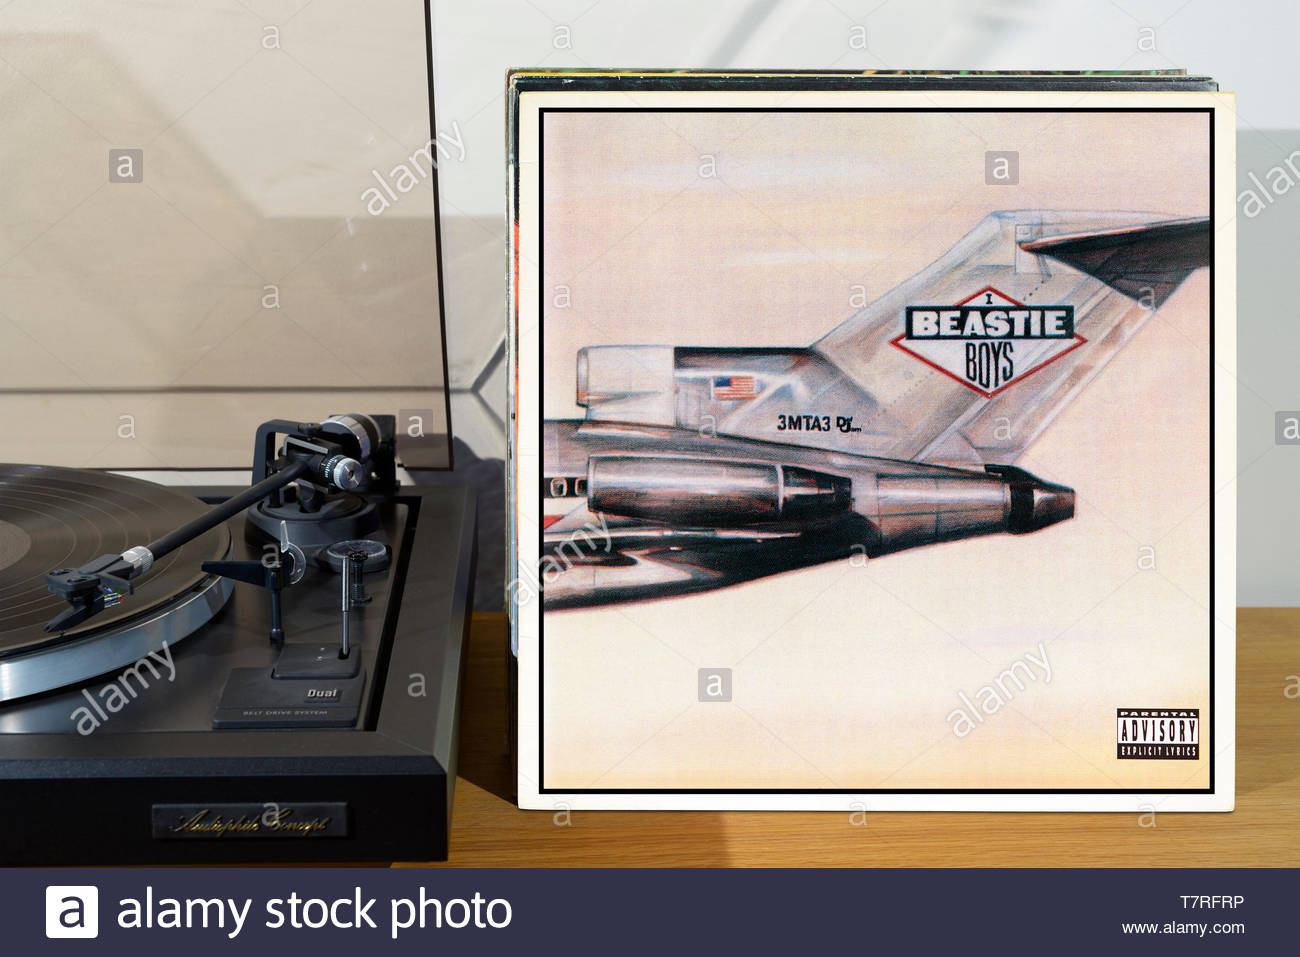 Beastie Boys Album High Resolution Stock Photography And Images Alamy